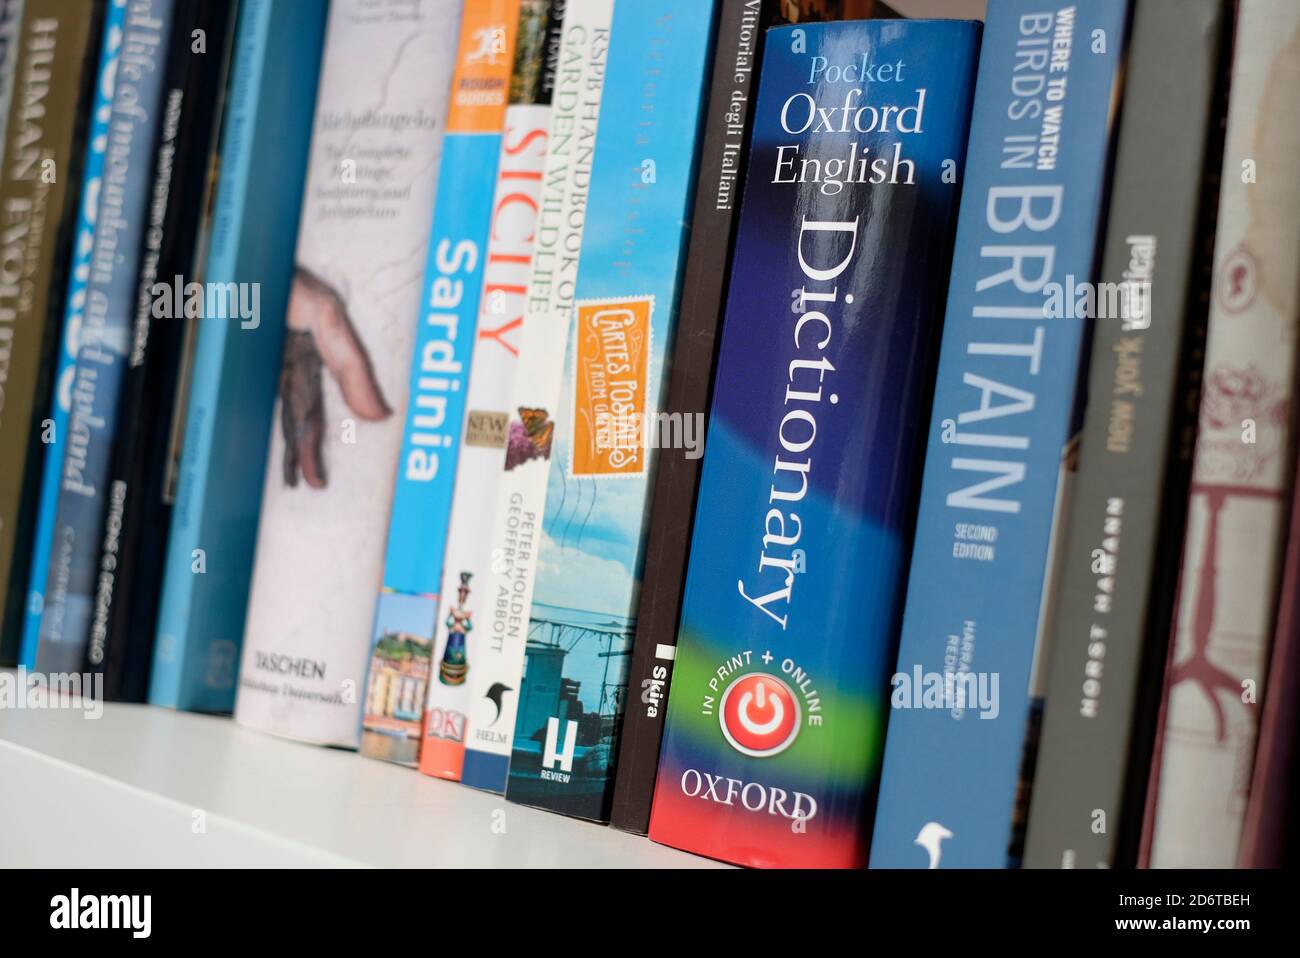 oxford english dictionary book in home interior Stock Photo